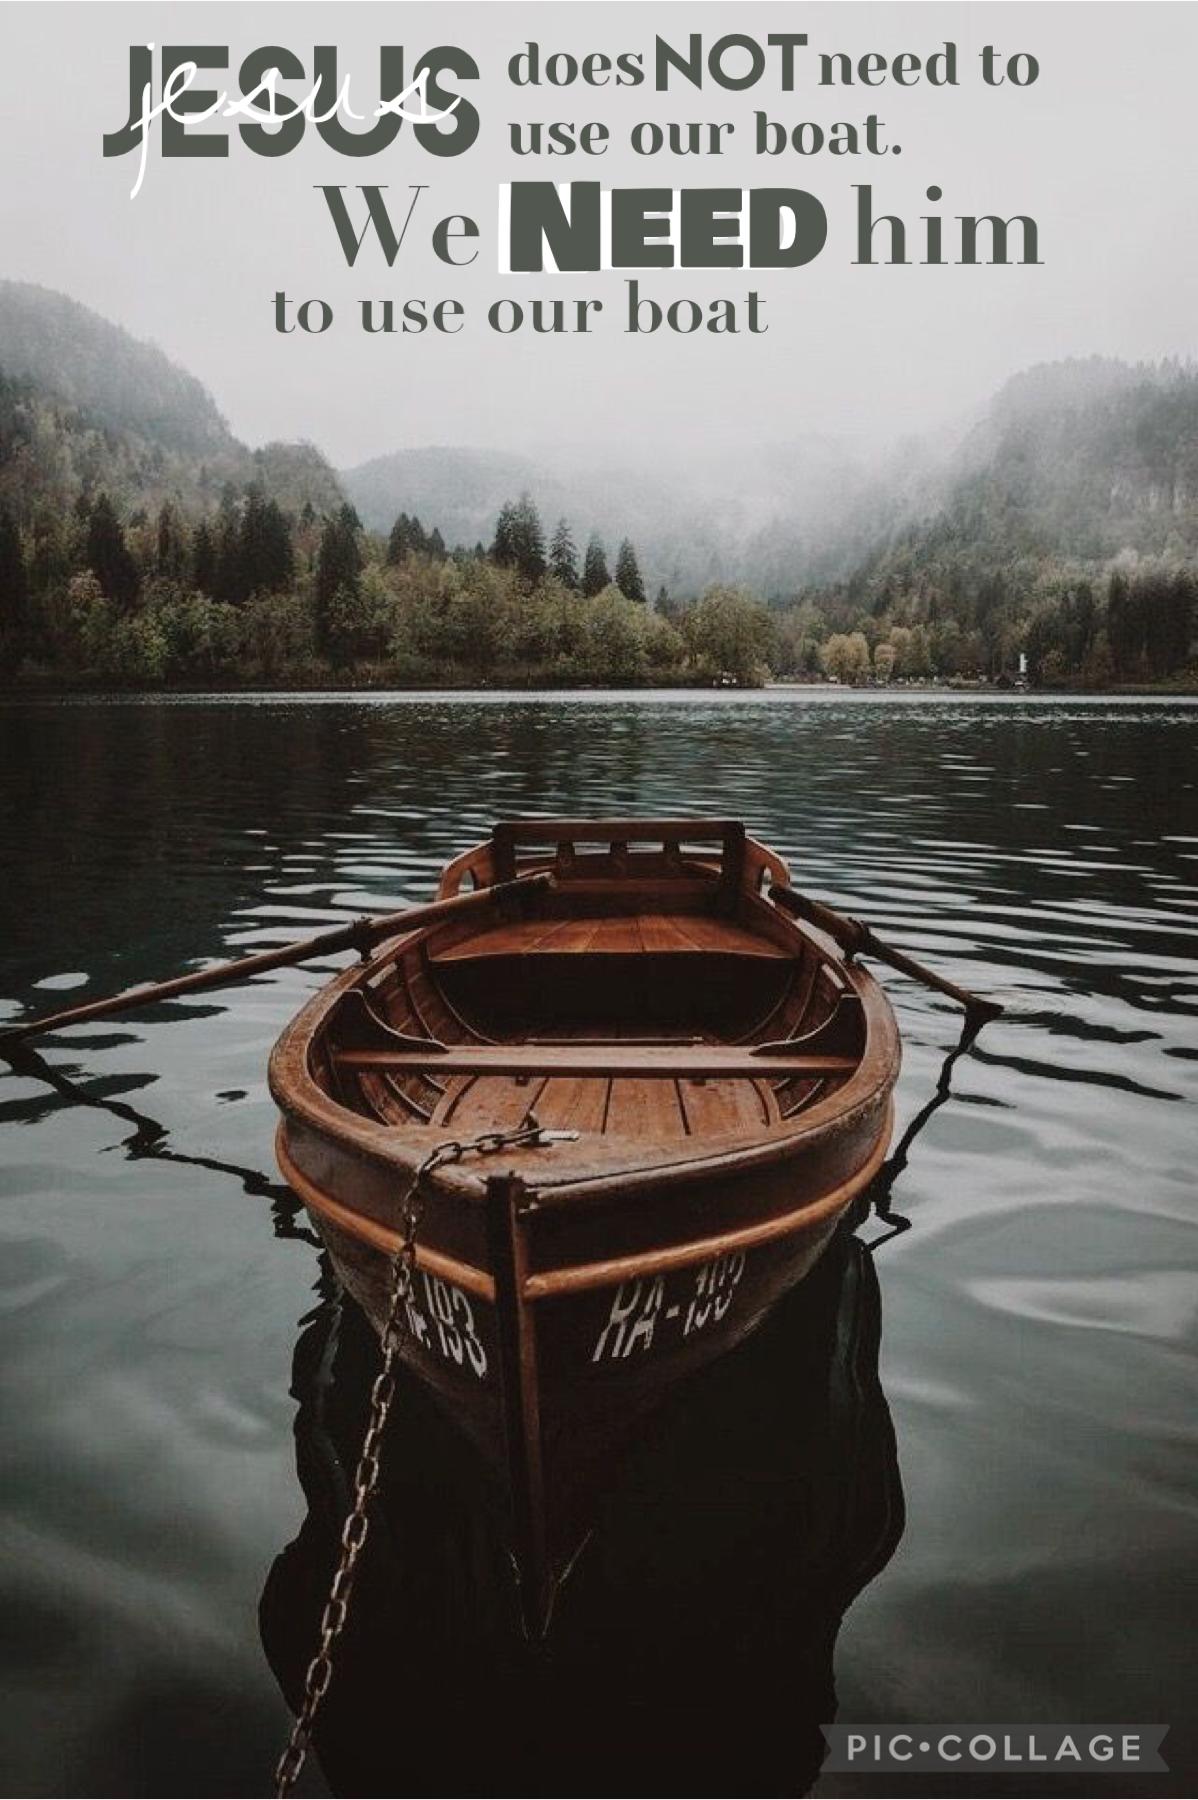 We need Jesus to be in our lives (our boats) Here’s a question, what was Jesus doing when Simon/Peter came back from fishing all night? What did Jesus do that changes Simon/Peter’s life? Answer in the comments or remixes and remember GOD LOVES YOU & YOU A